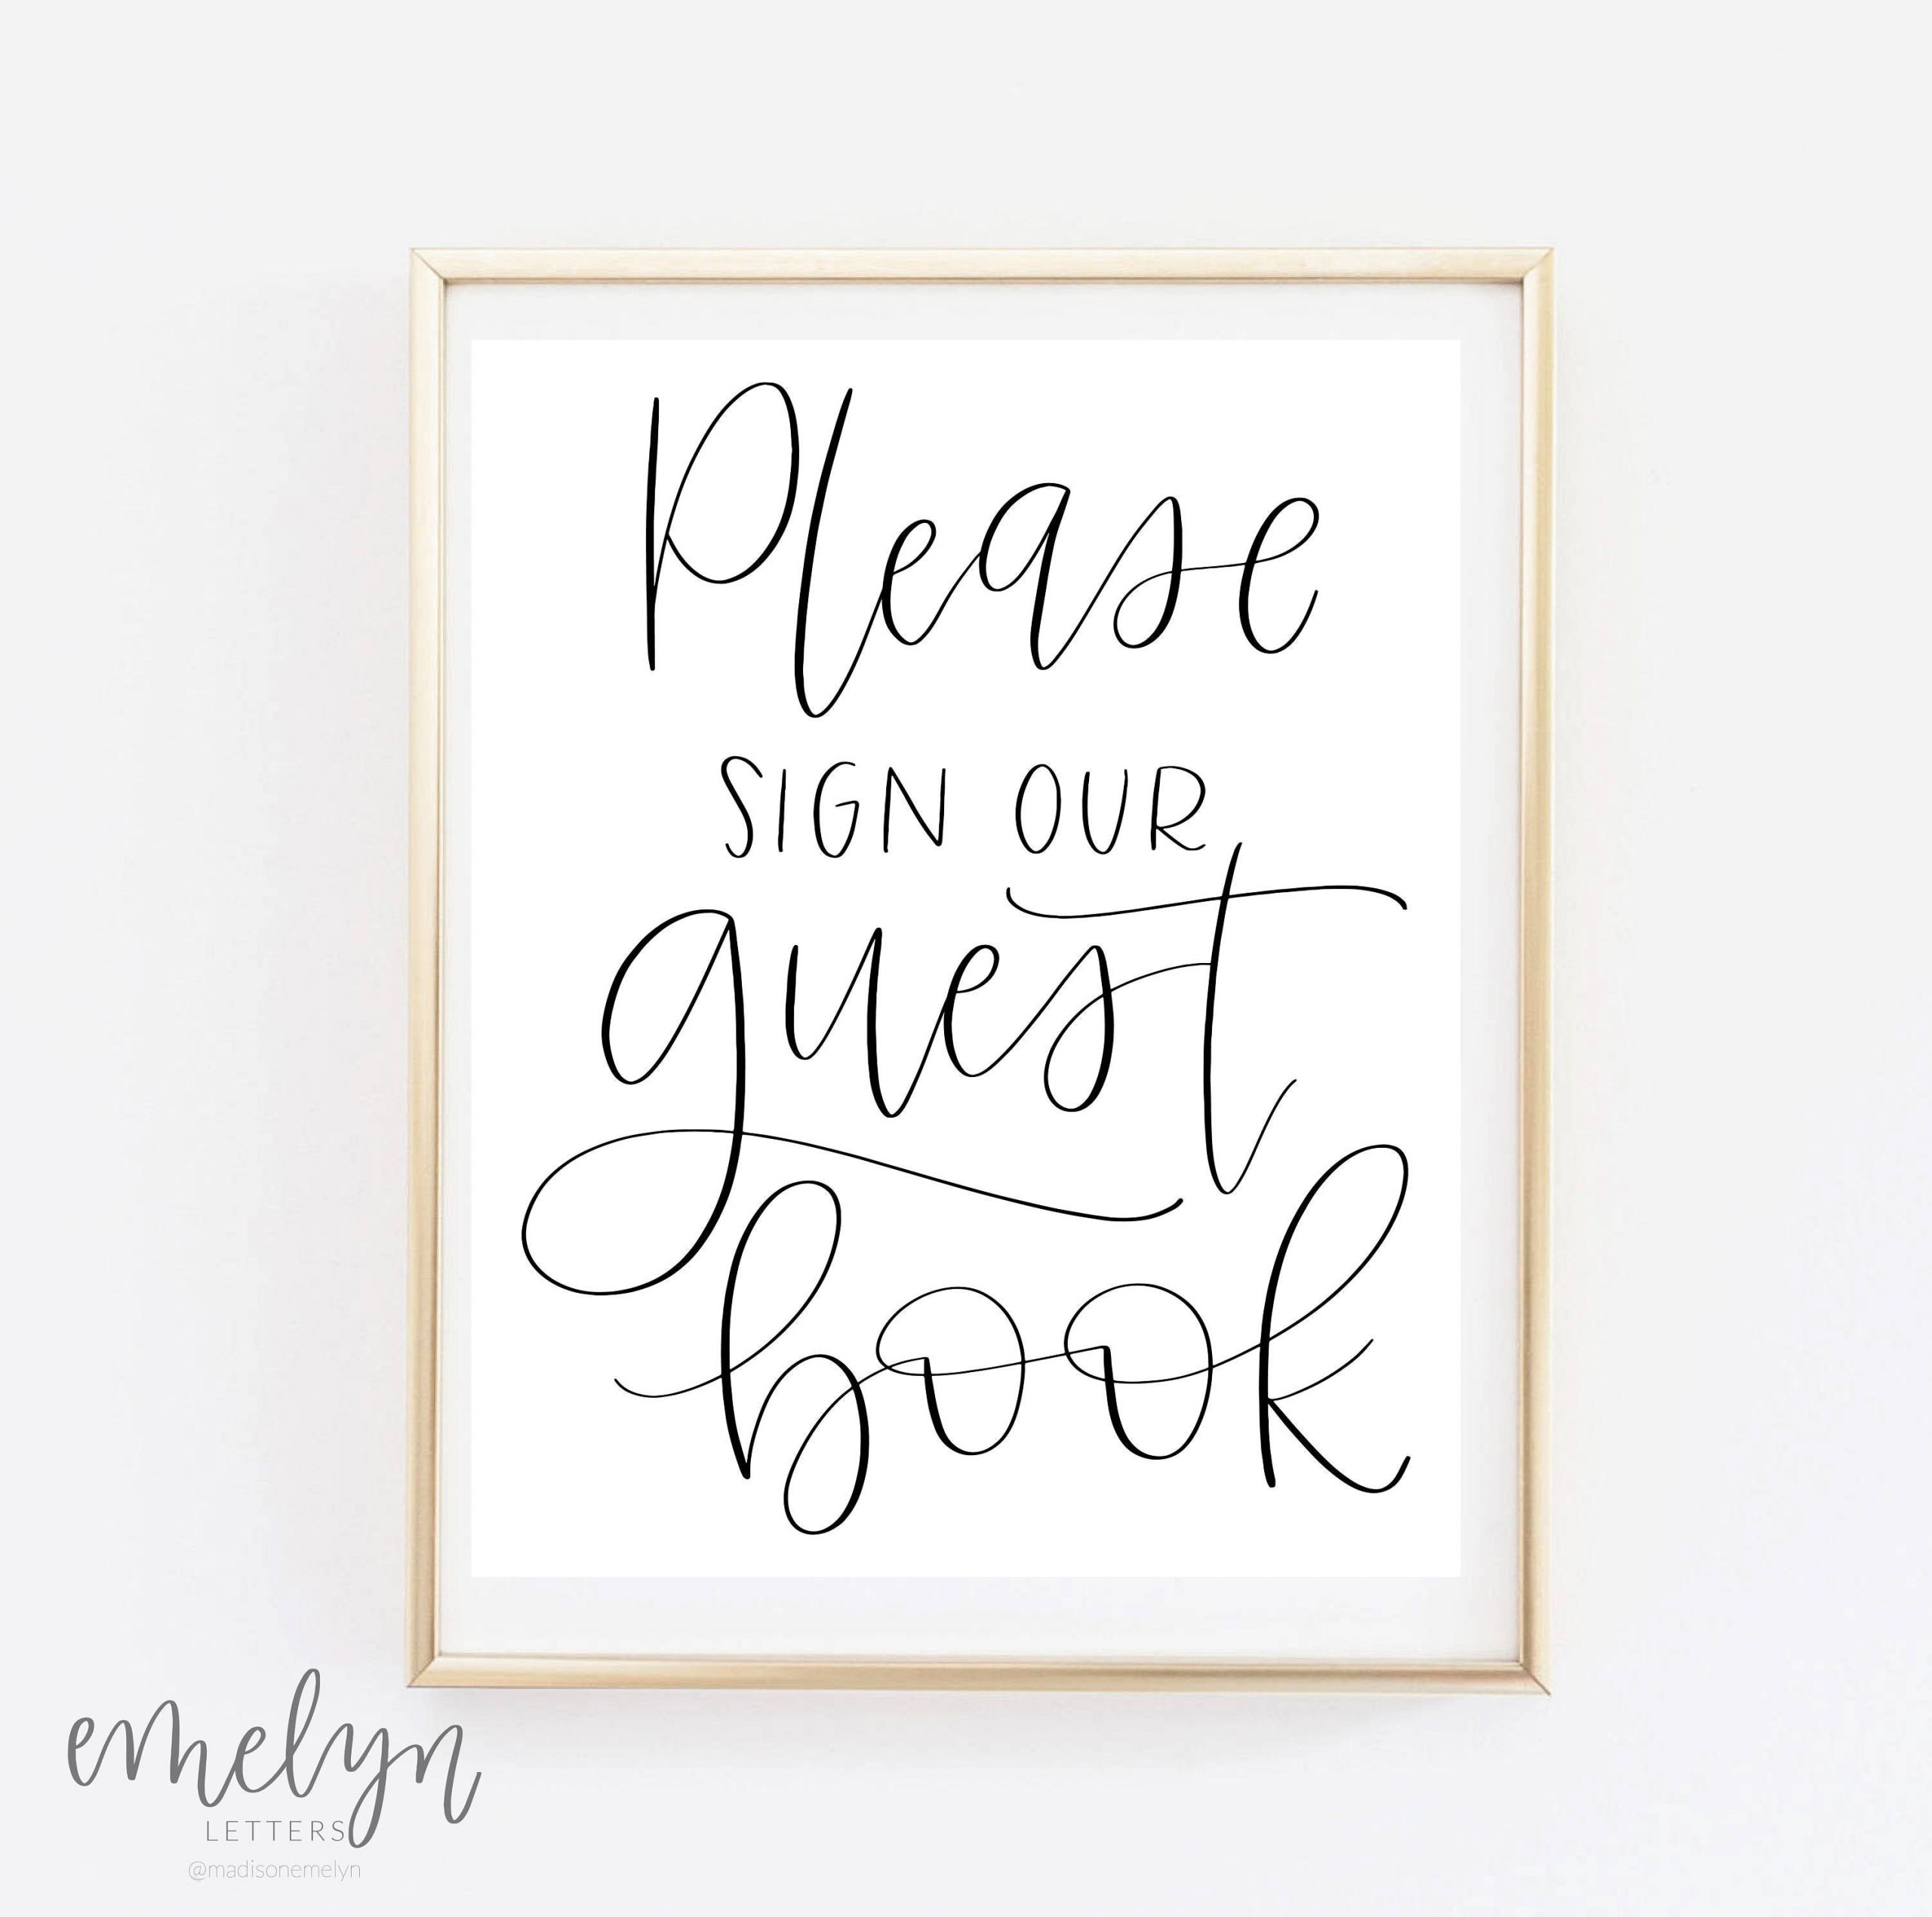 Wedding Guest Sign-in Book
 Please Sign Our Guest Book Wedding Print Guestbook Sign